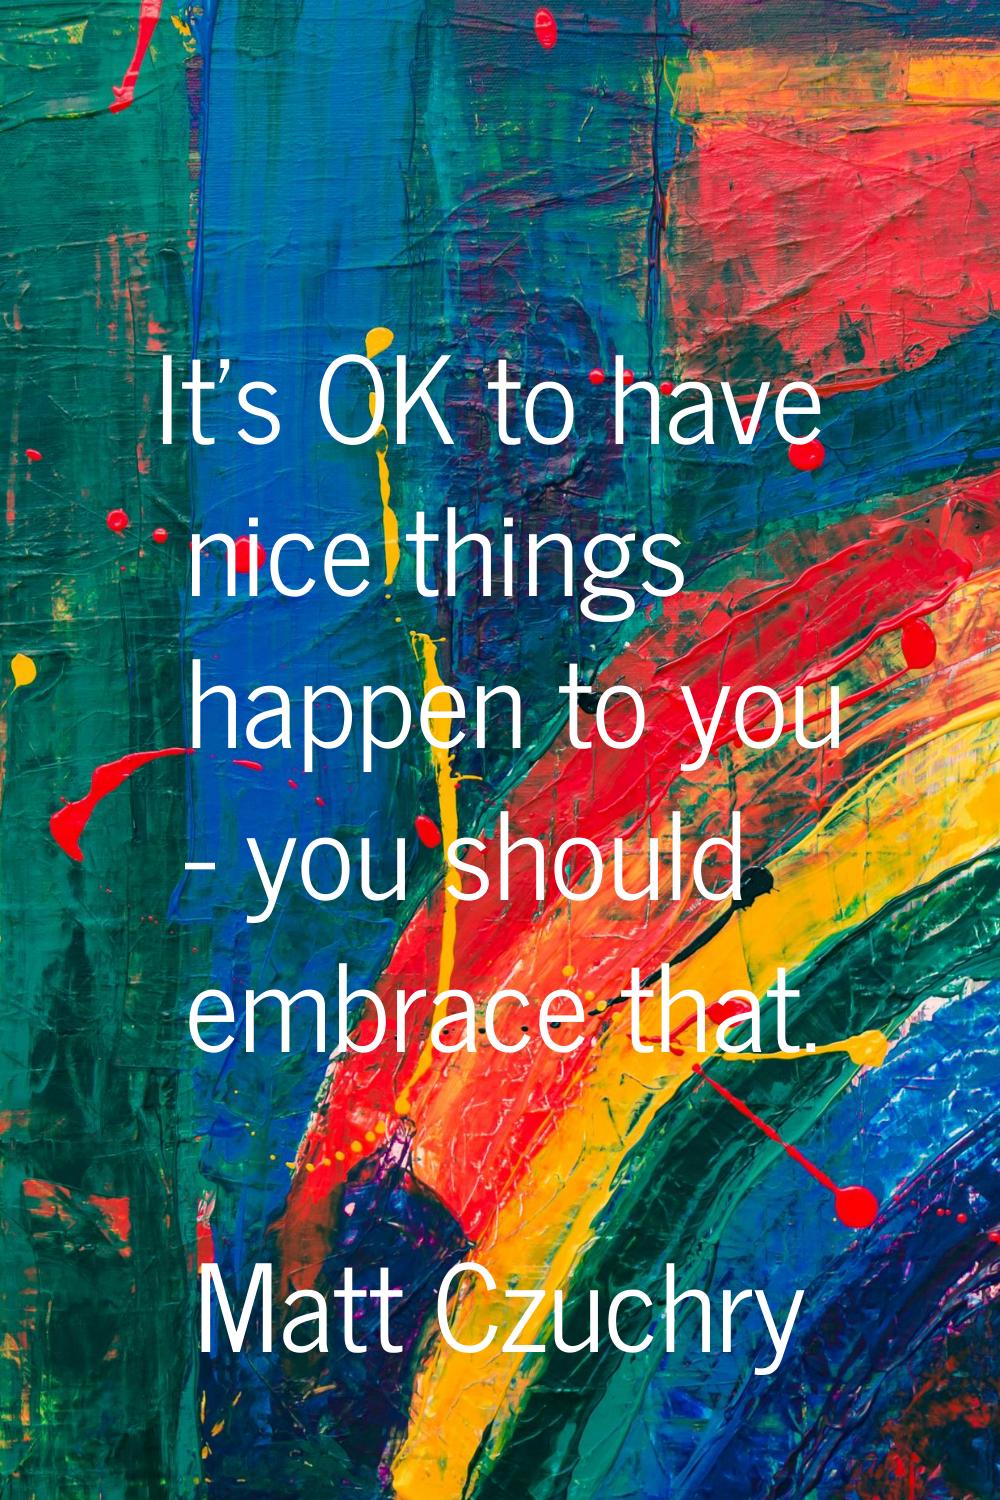 It's OK to have nice things happen to you - you should embrace that.